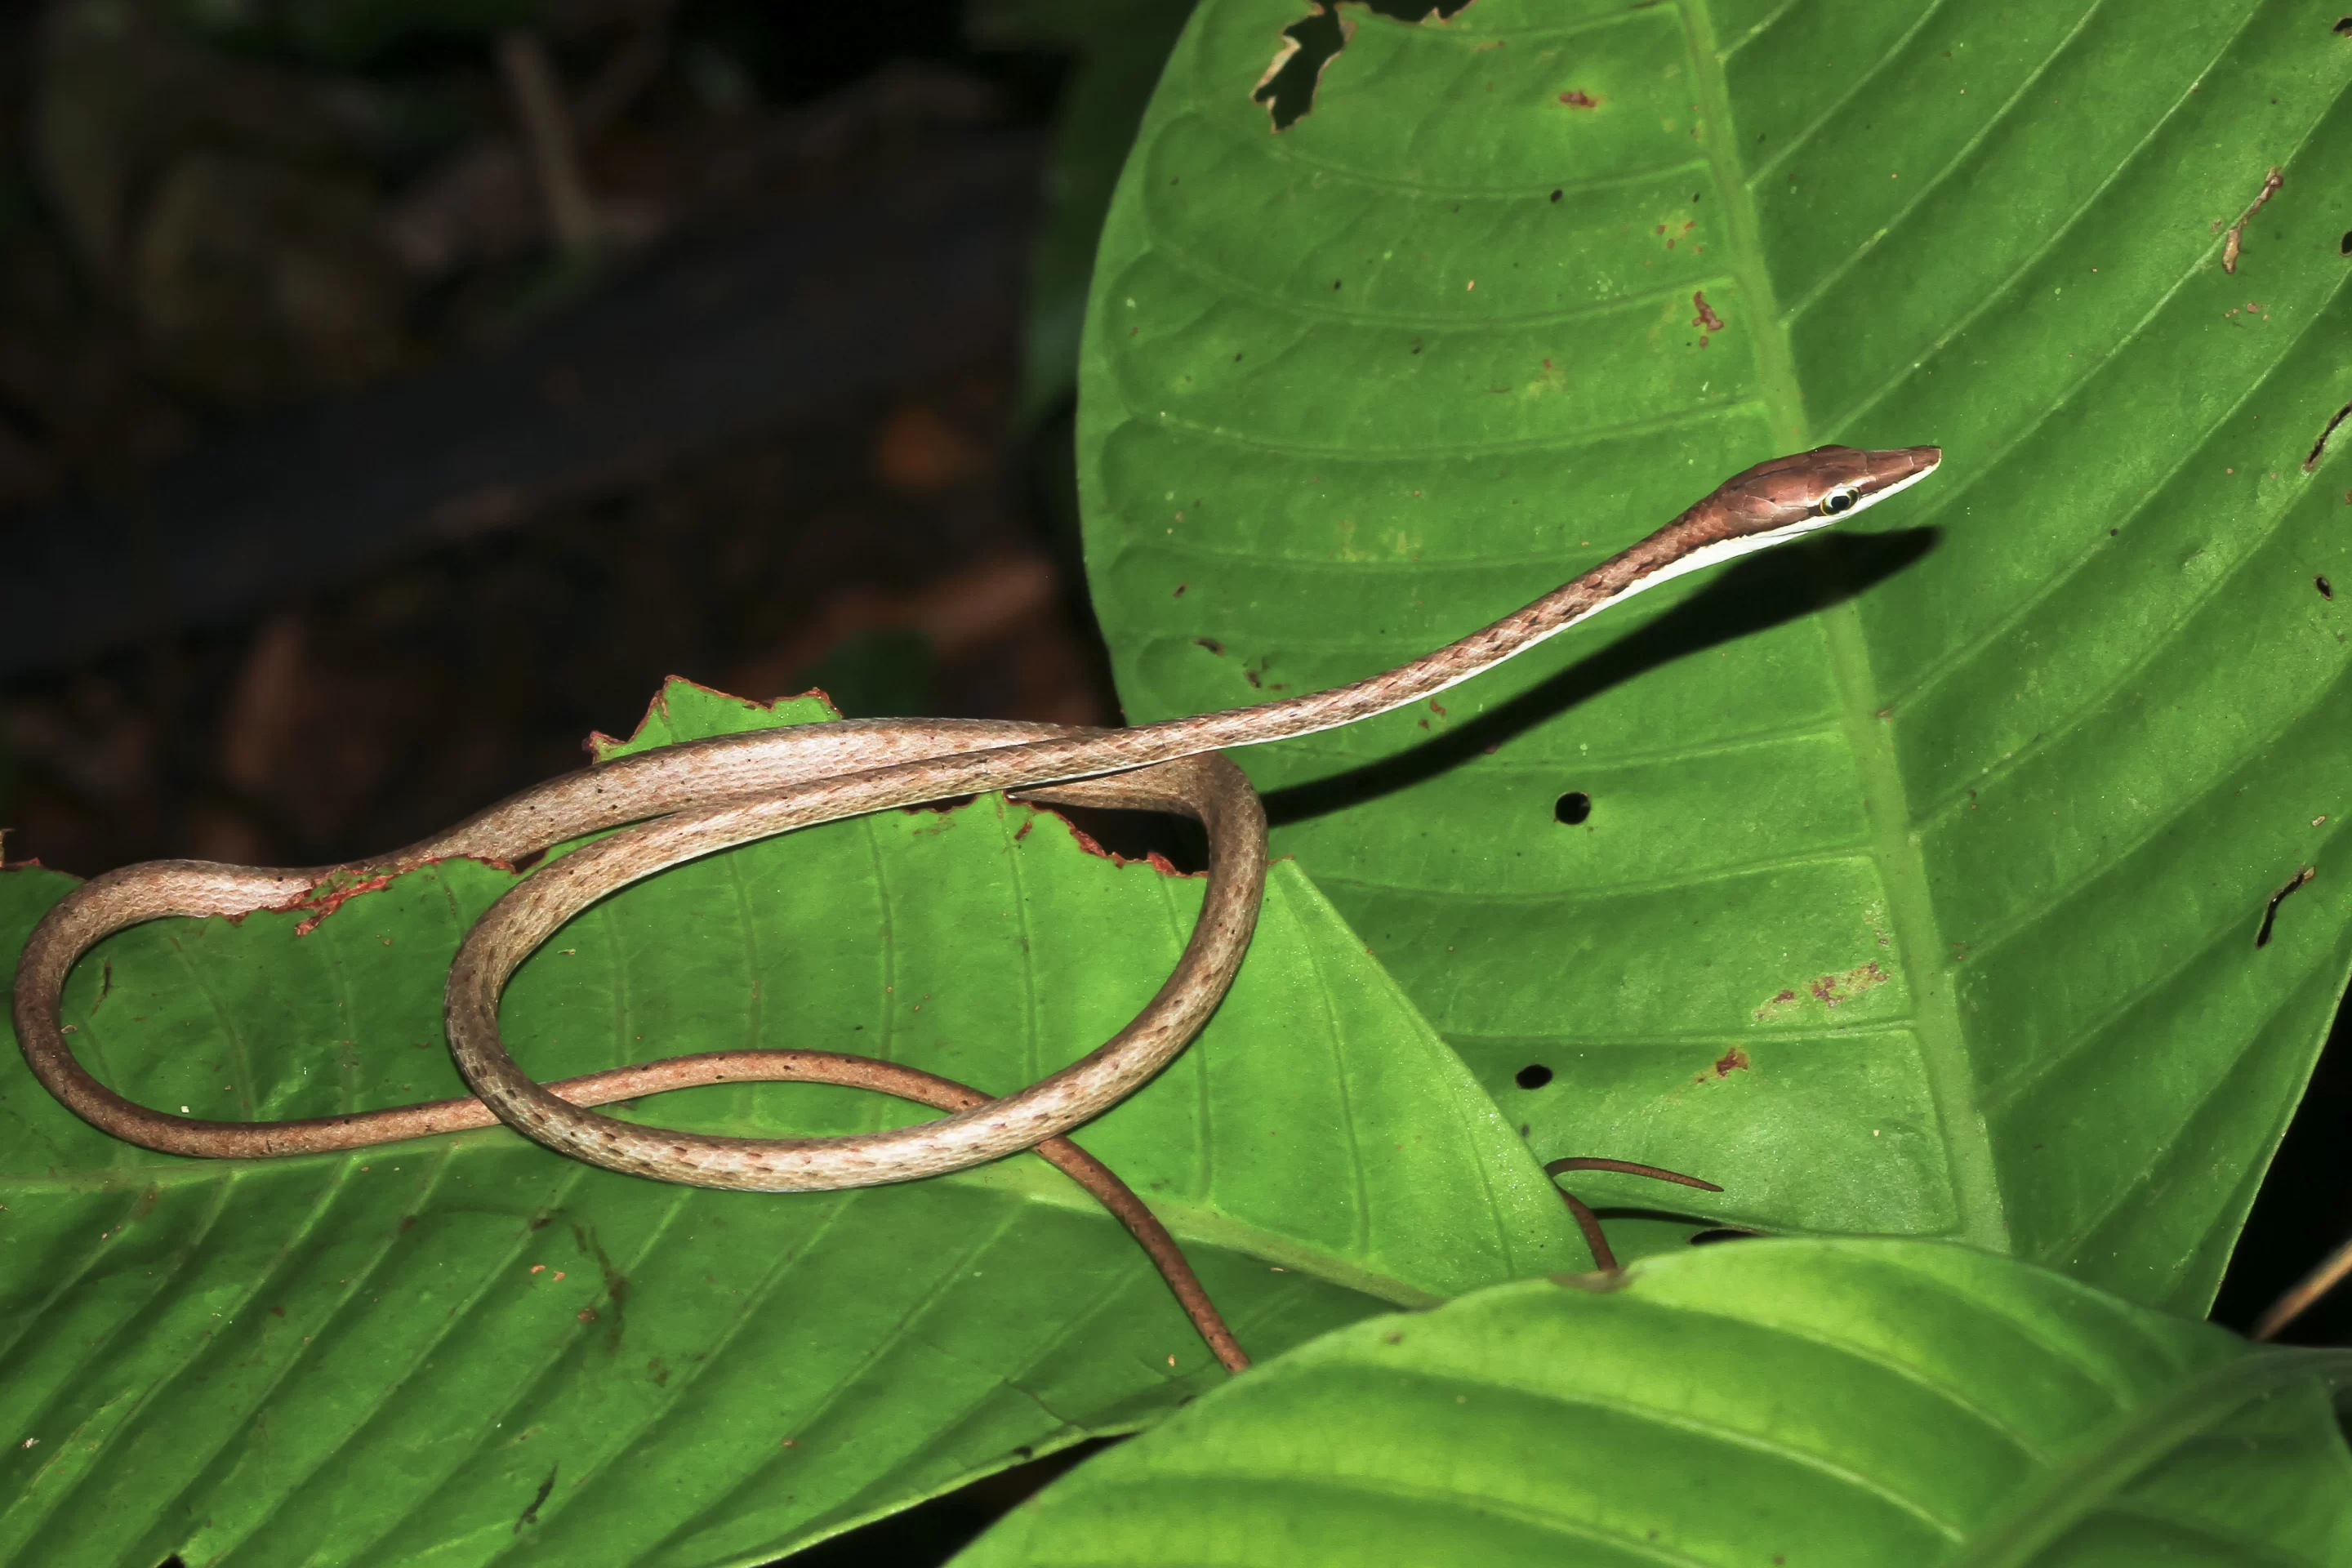 Get ready to identify various snake species slithering through the vegetation.